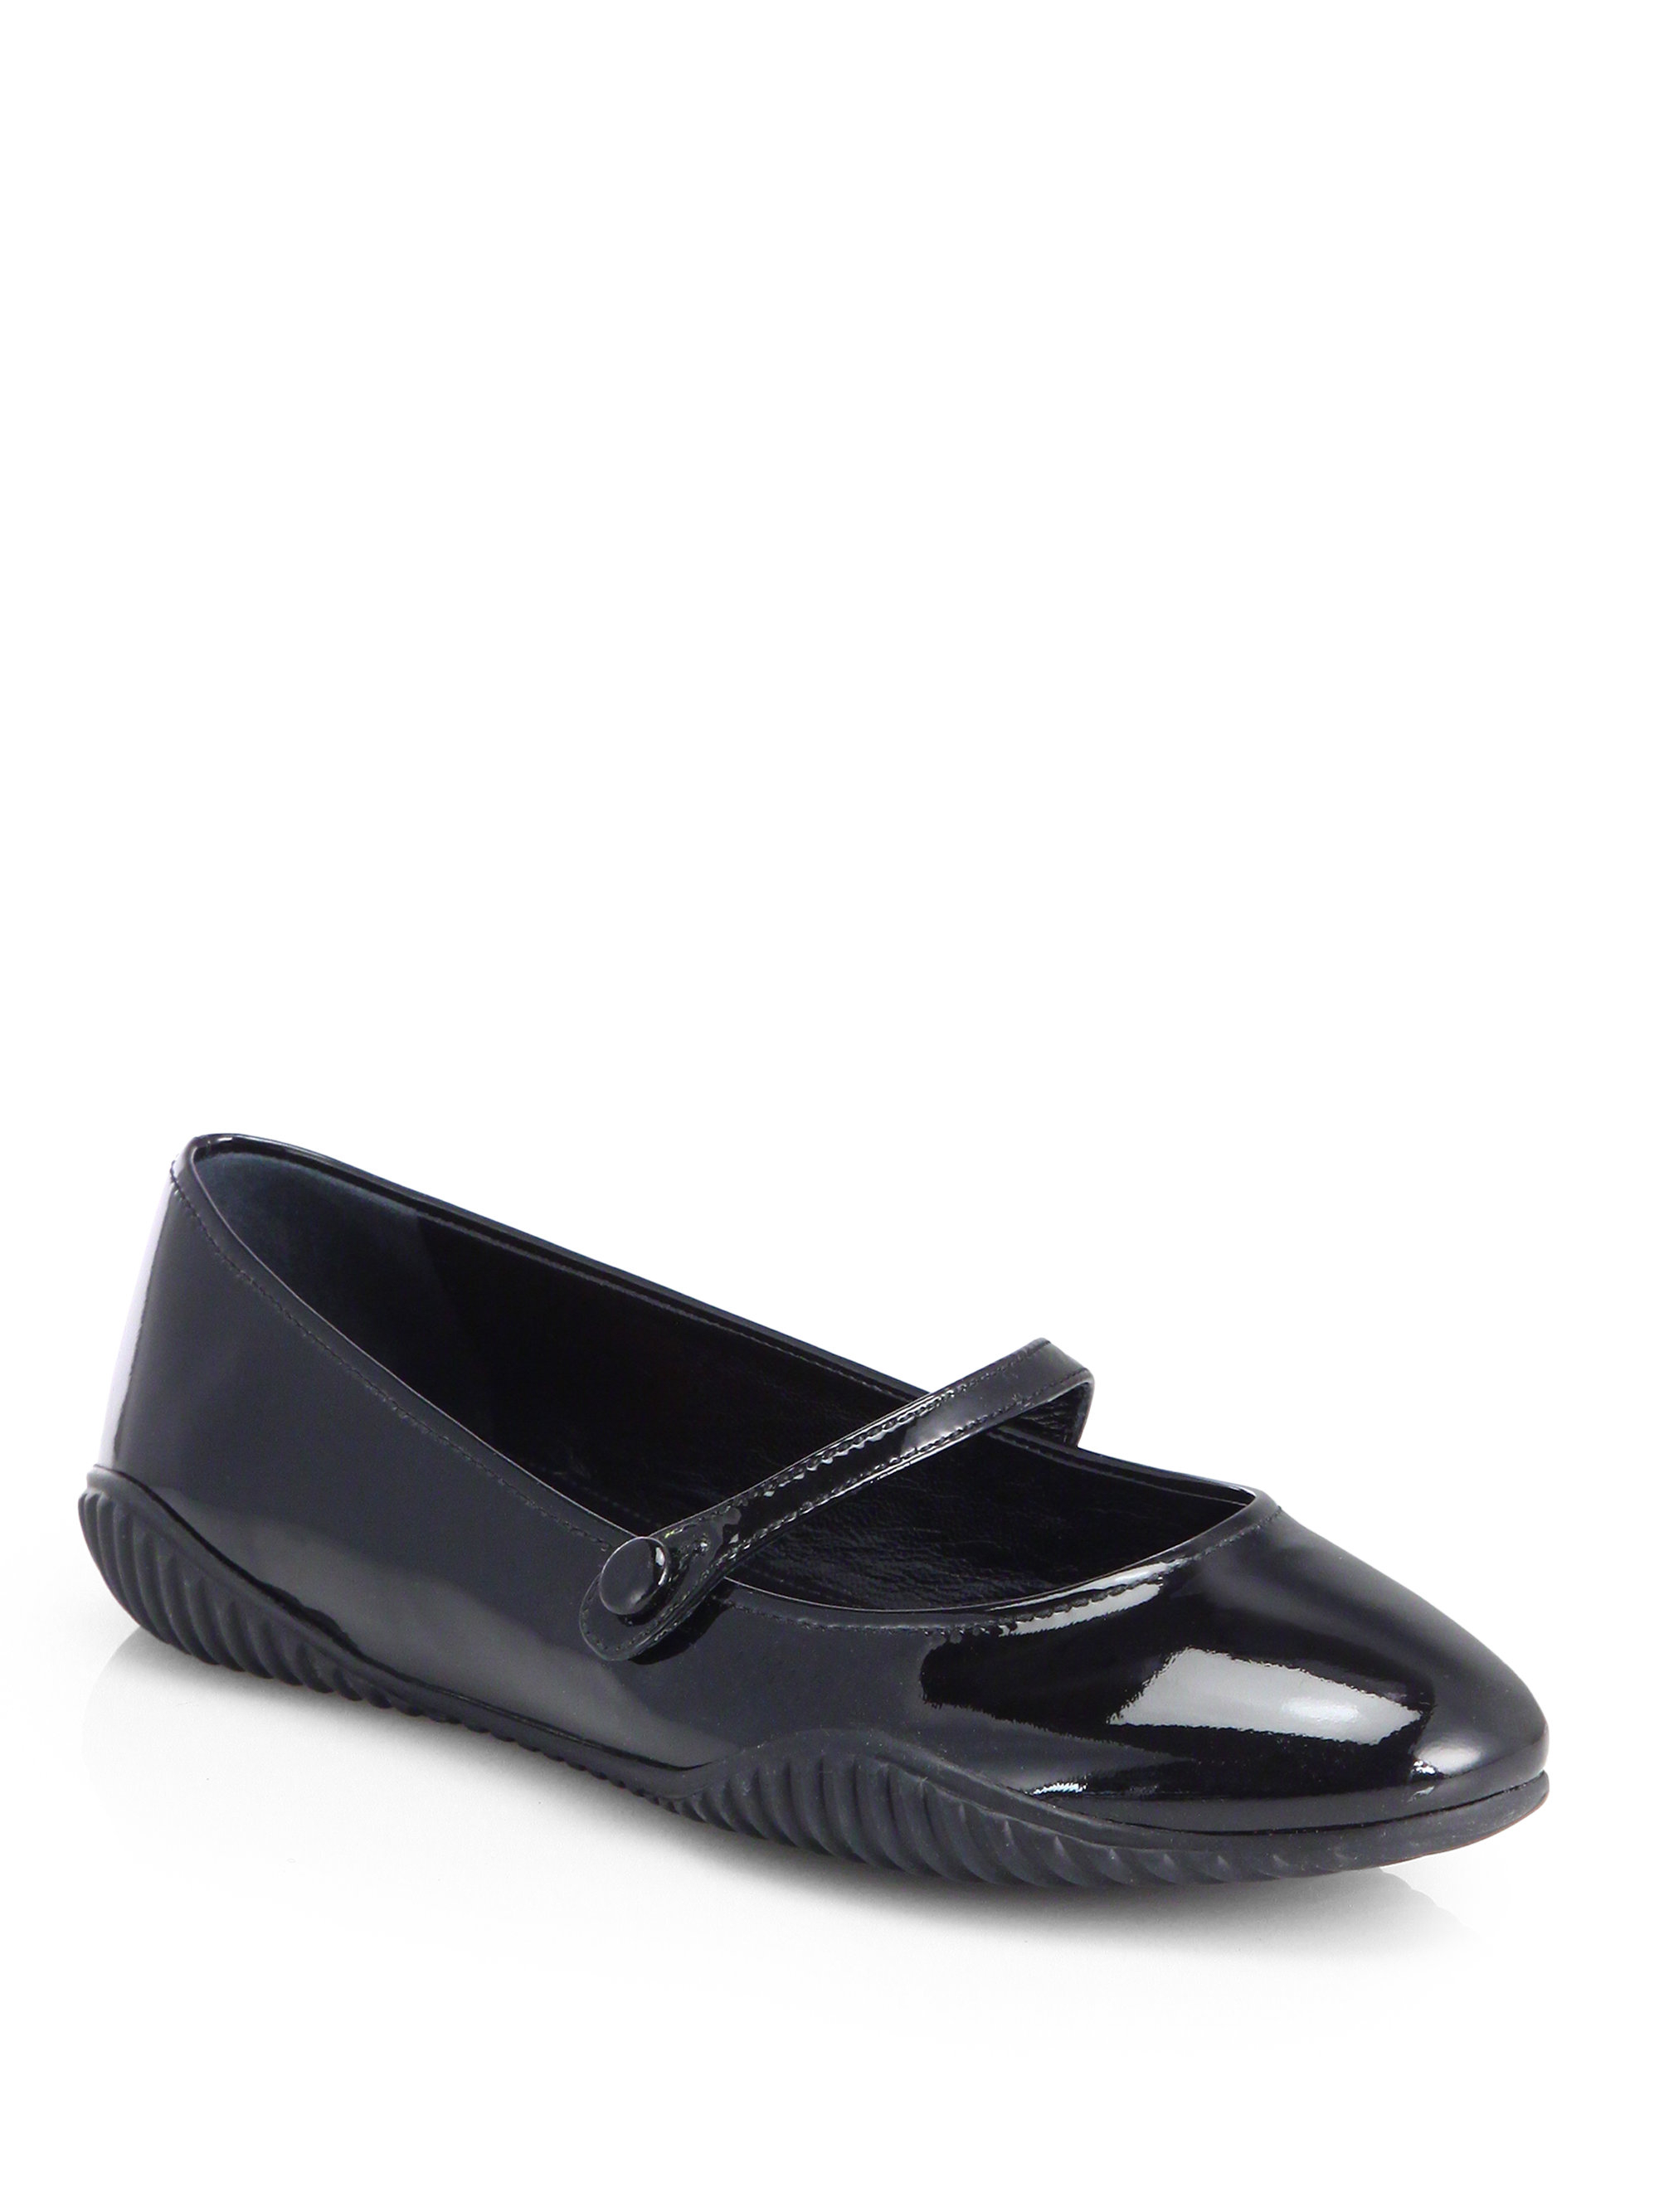 Prada Patent Leather Mary Jane Ballet Flats in Black | Lyst